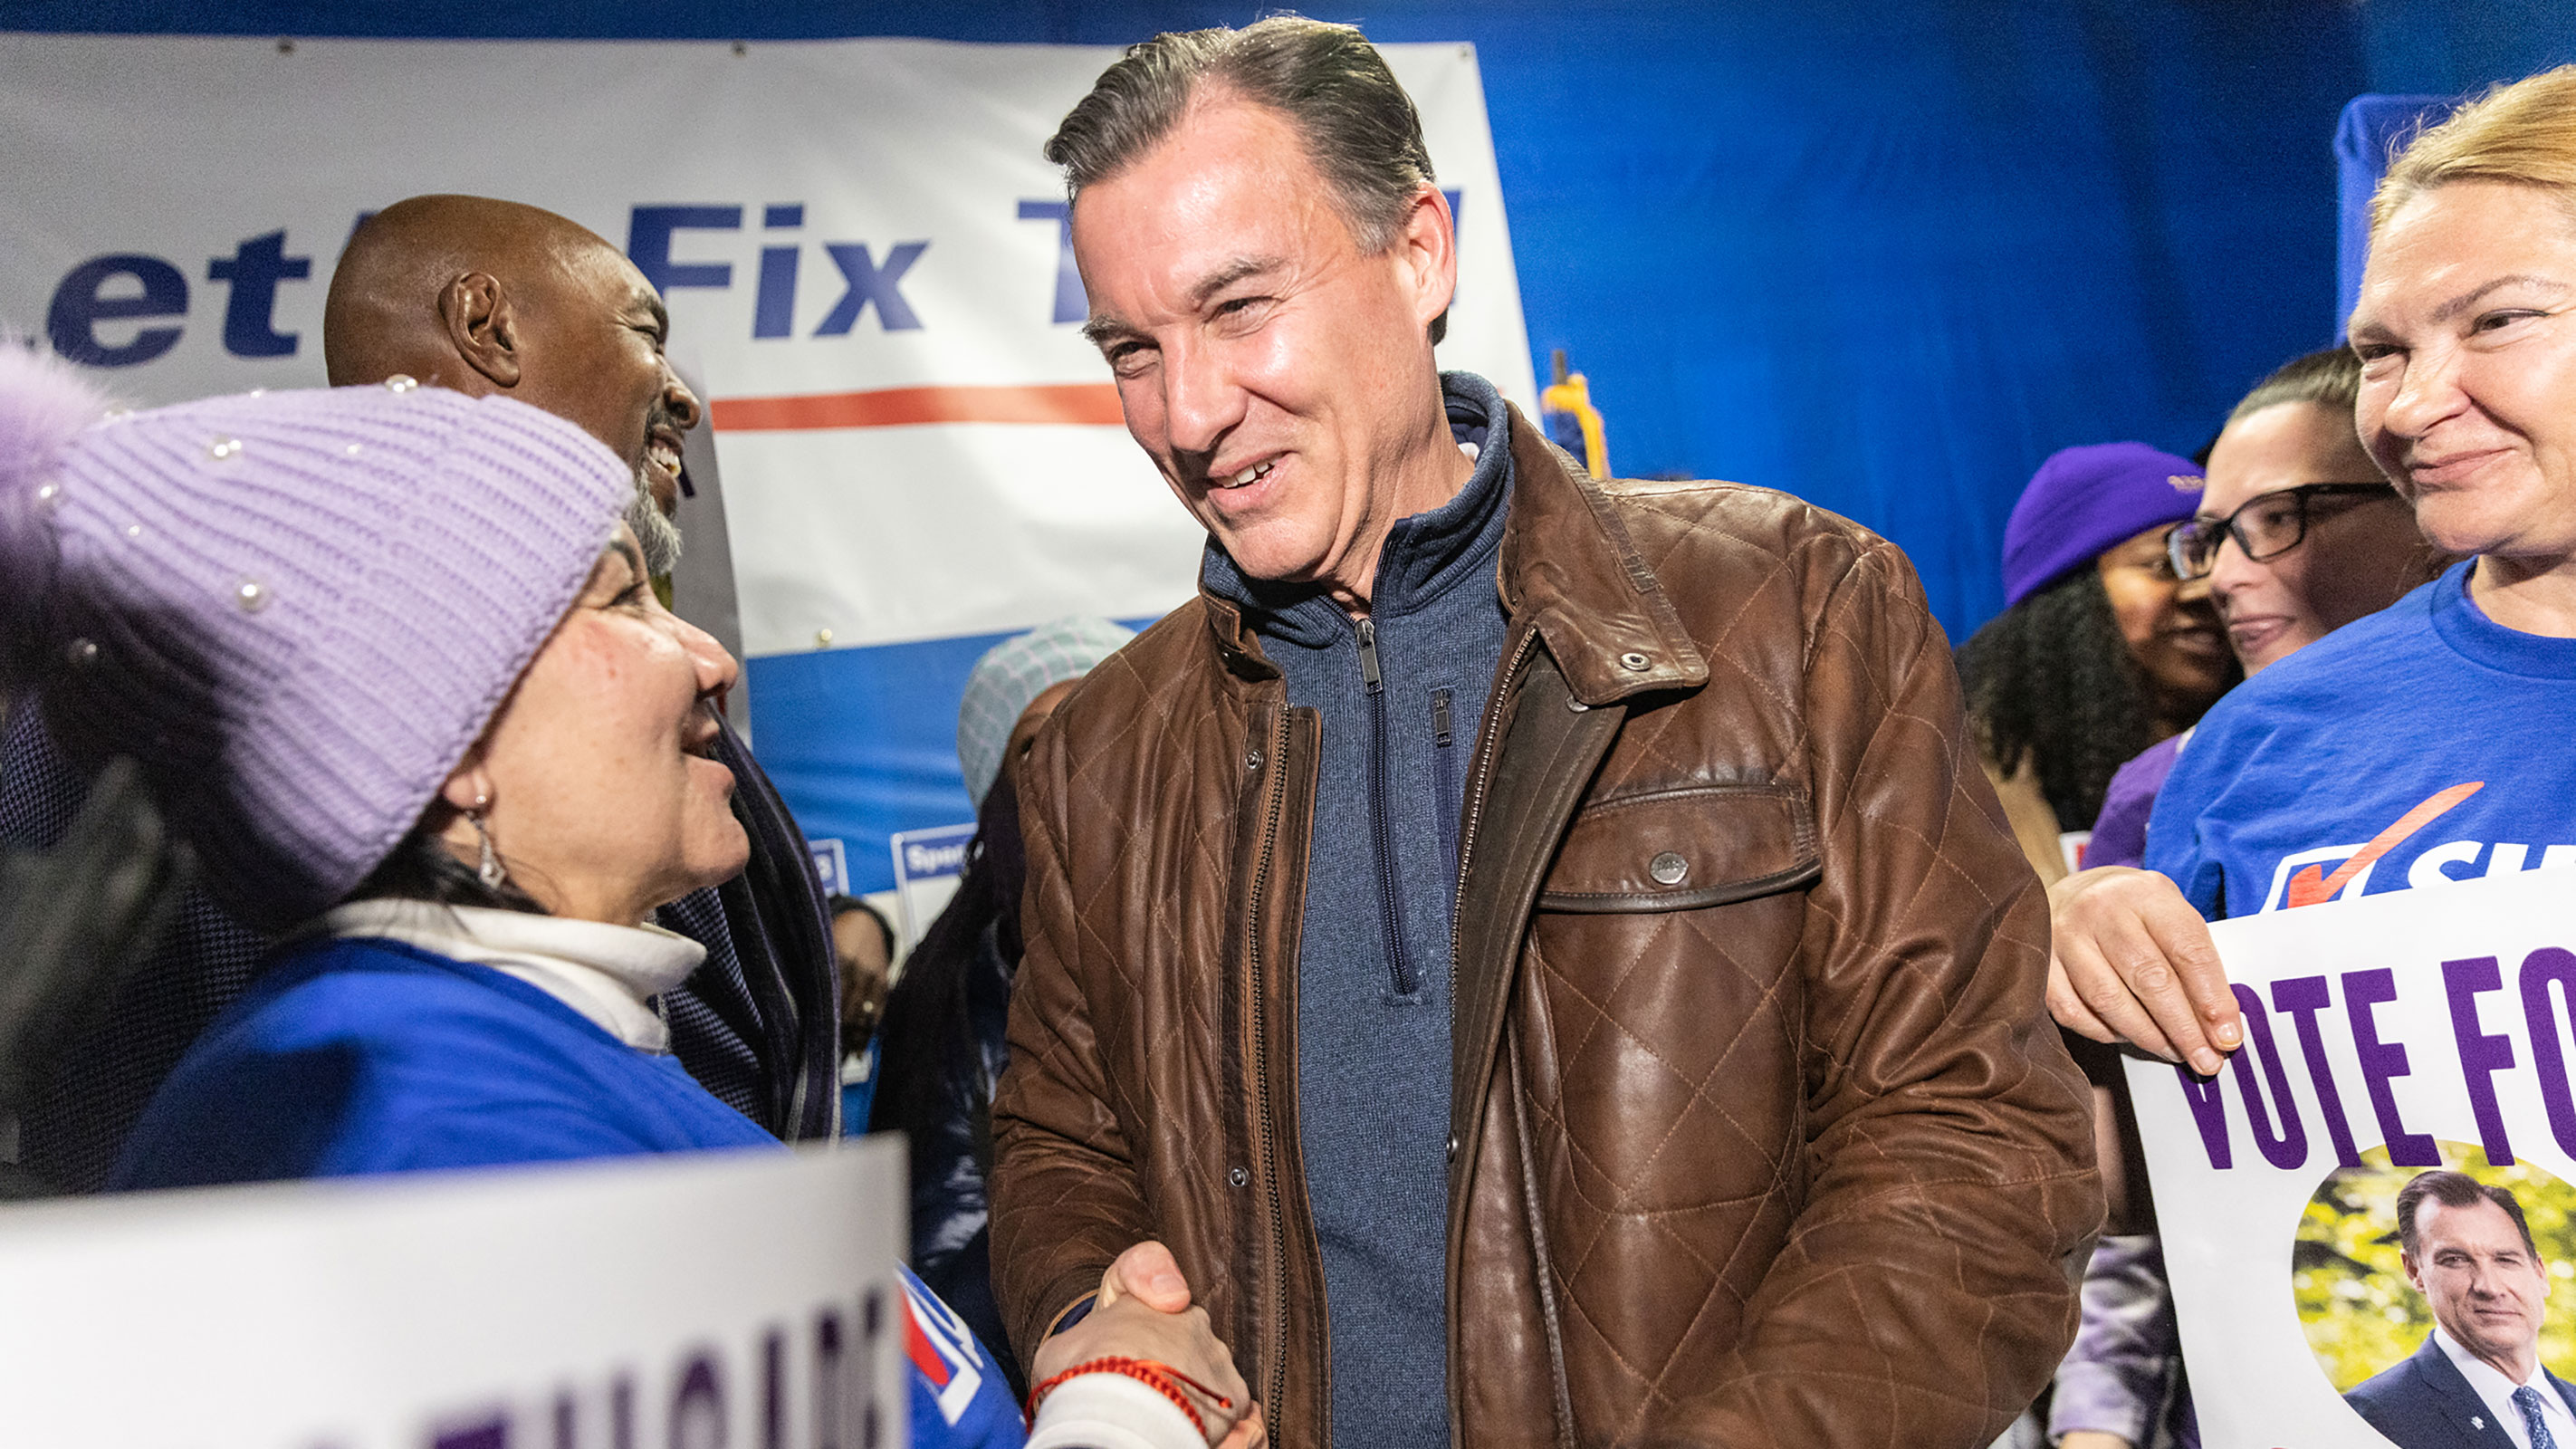 Tom Suozzi shakes hands with an attendee during the Westbury Canvass Launch in Westbury, New York, on Tuesday.